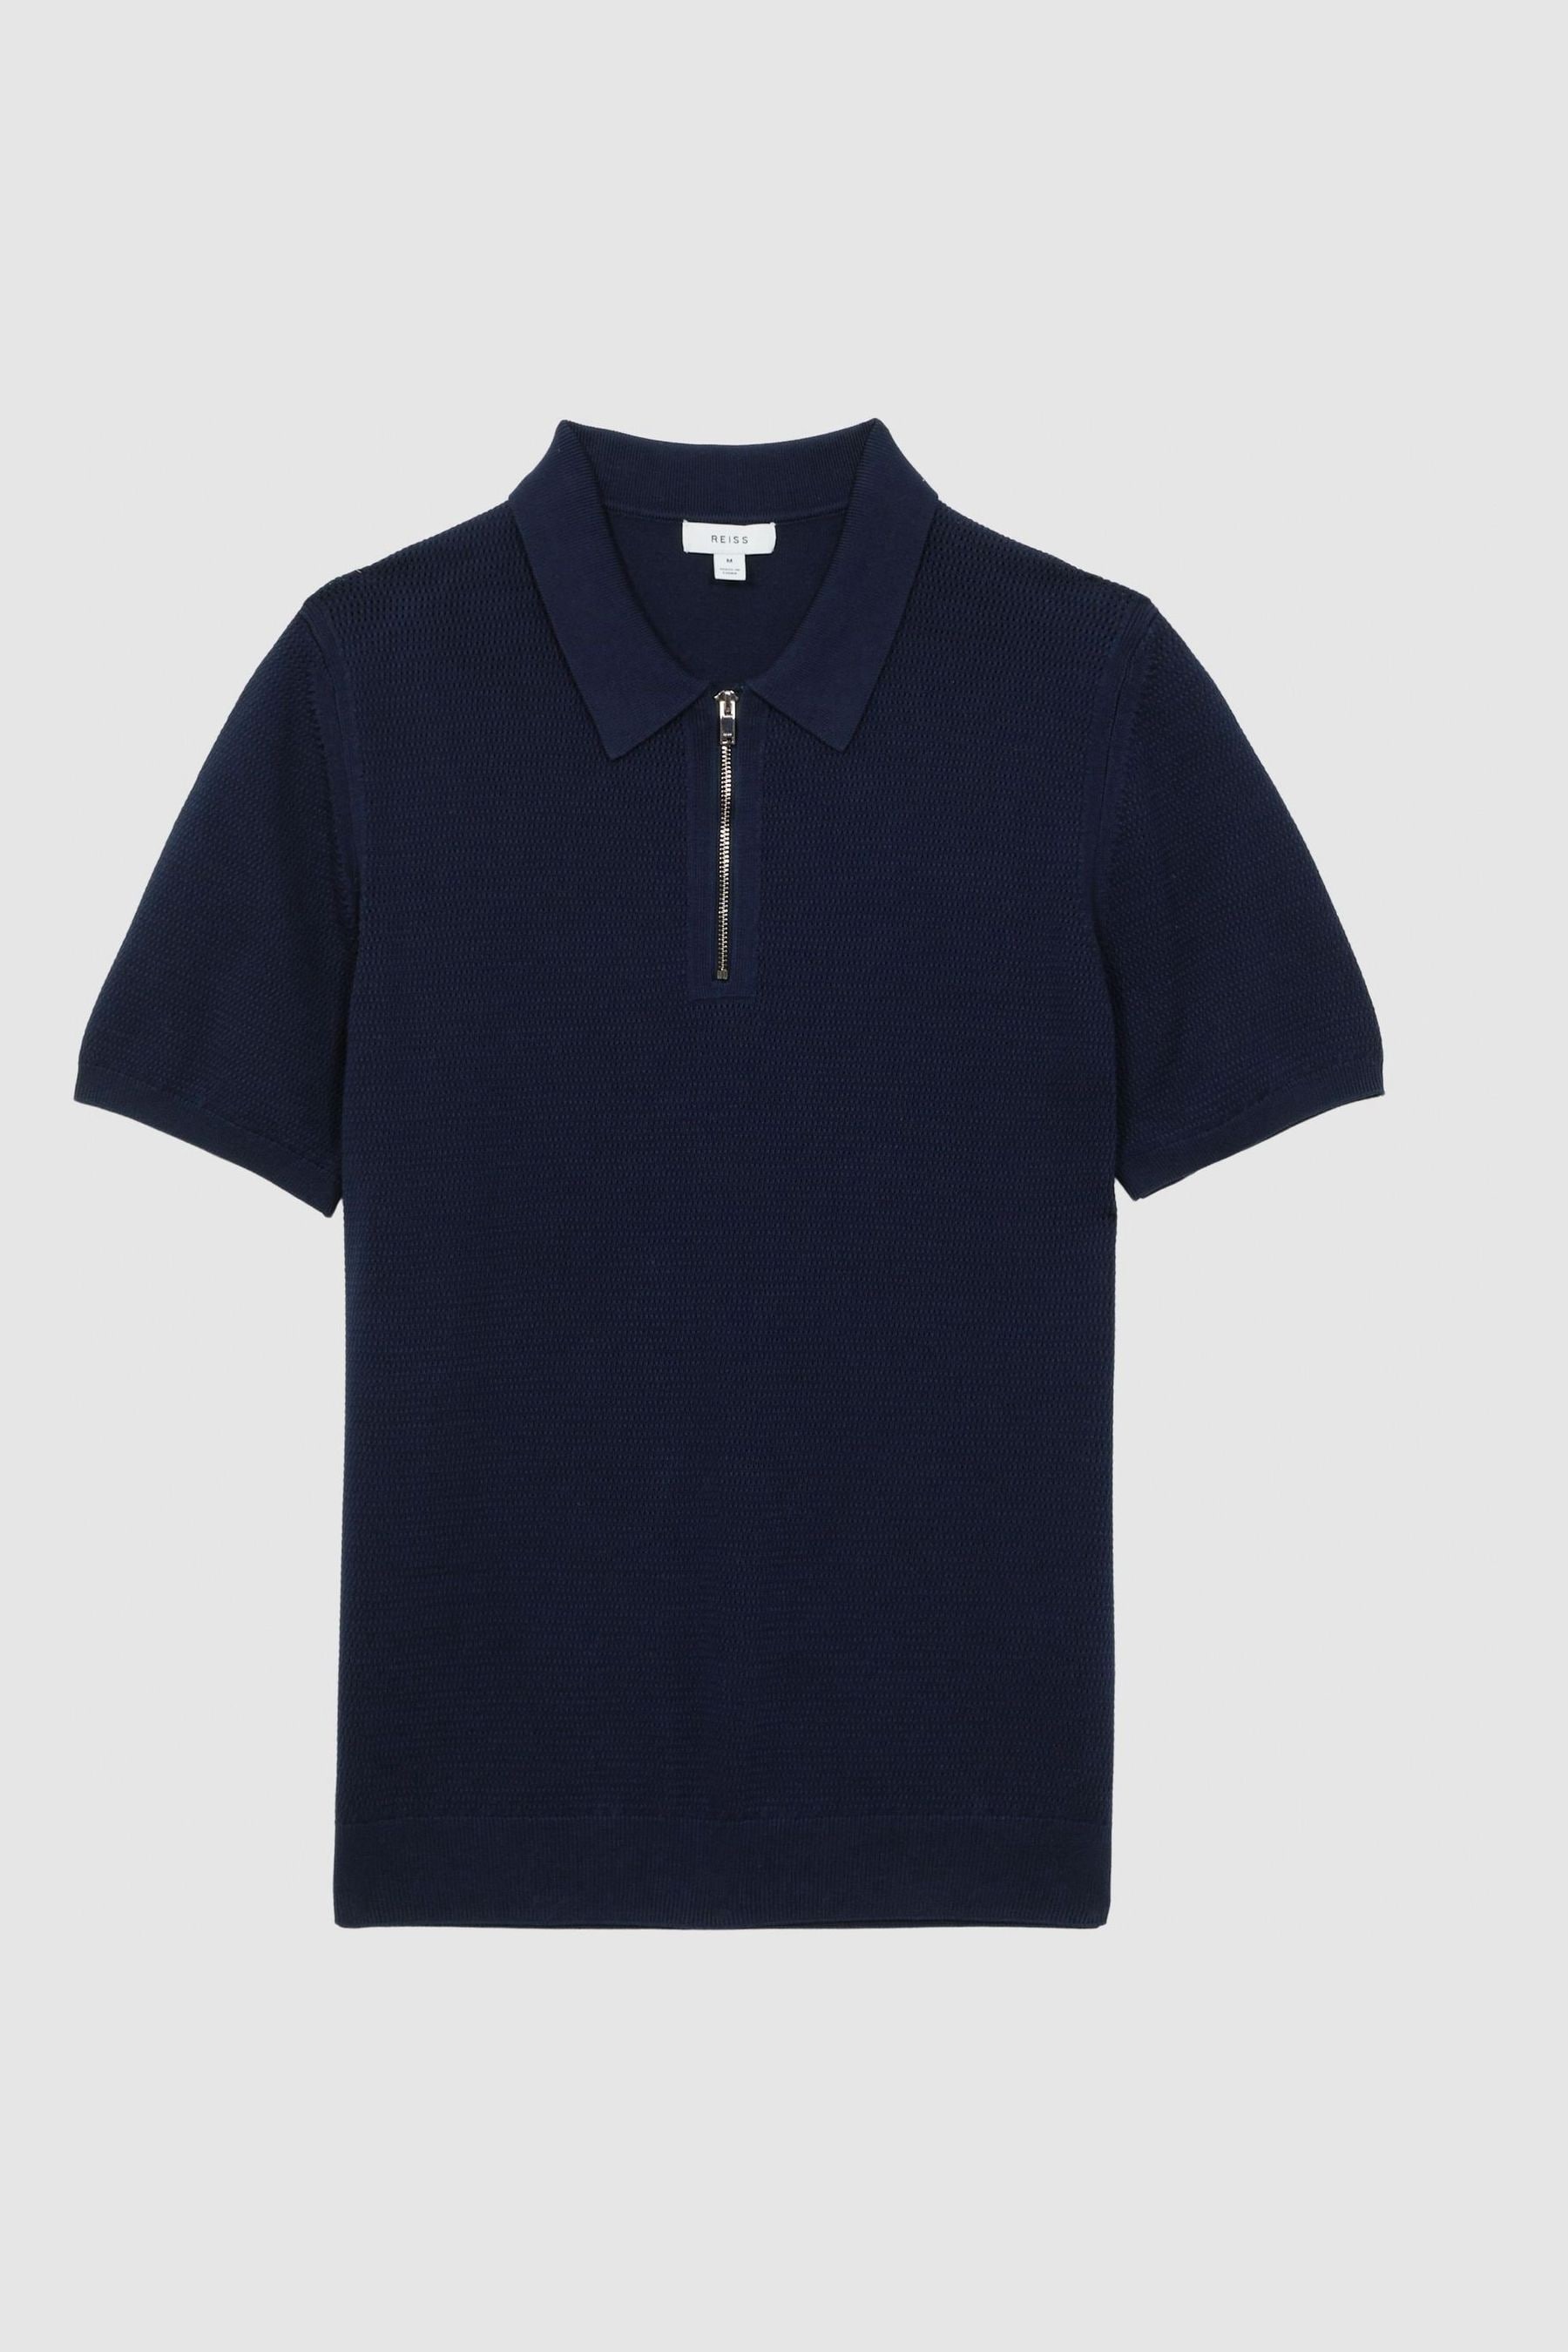 Buy Reiss Navy Fizz Knitted Half-Zip Polo T-Shirt from the Next UK ...